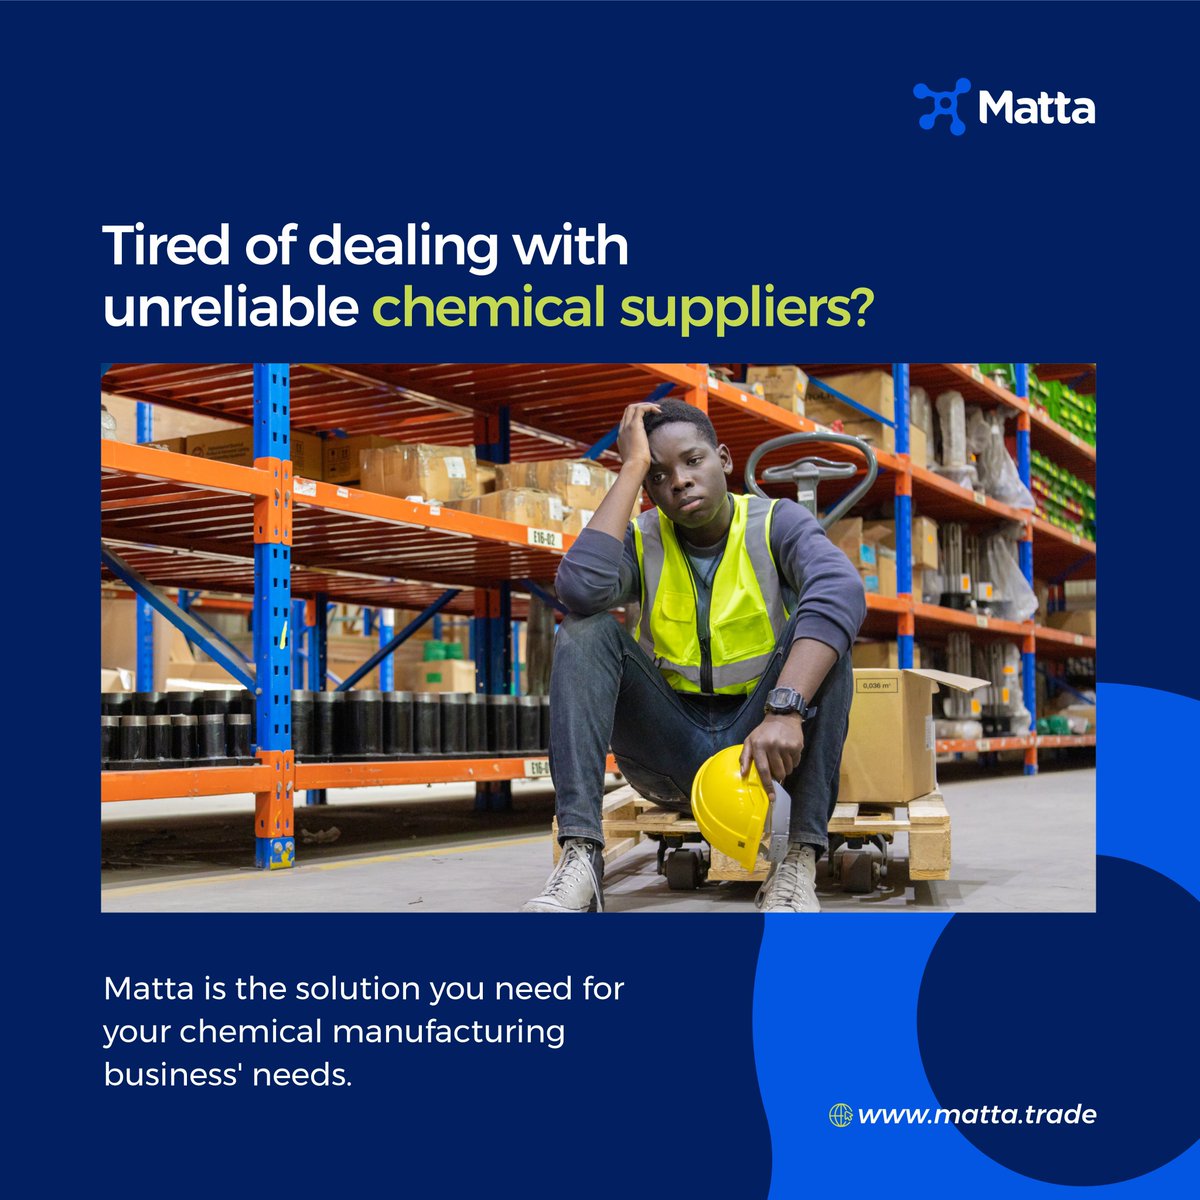 Ditch the supplier drama!
Matta streamlines chemical procurement.
Say goodbye to unreliable sources & headaches! #Matta #ChemicalManufacturing